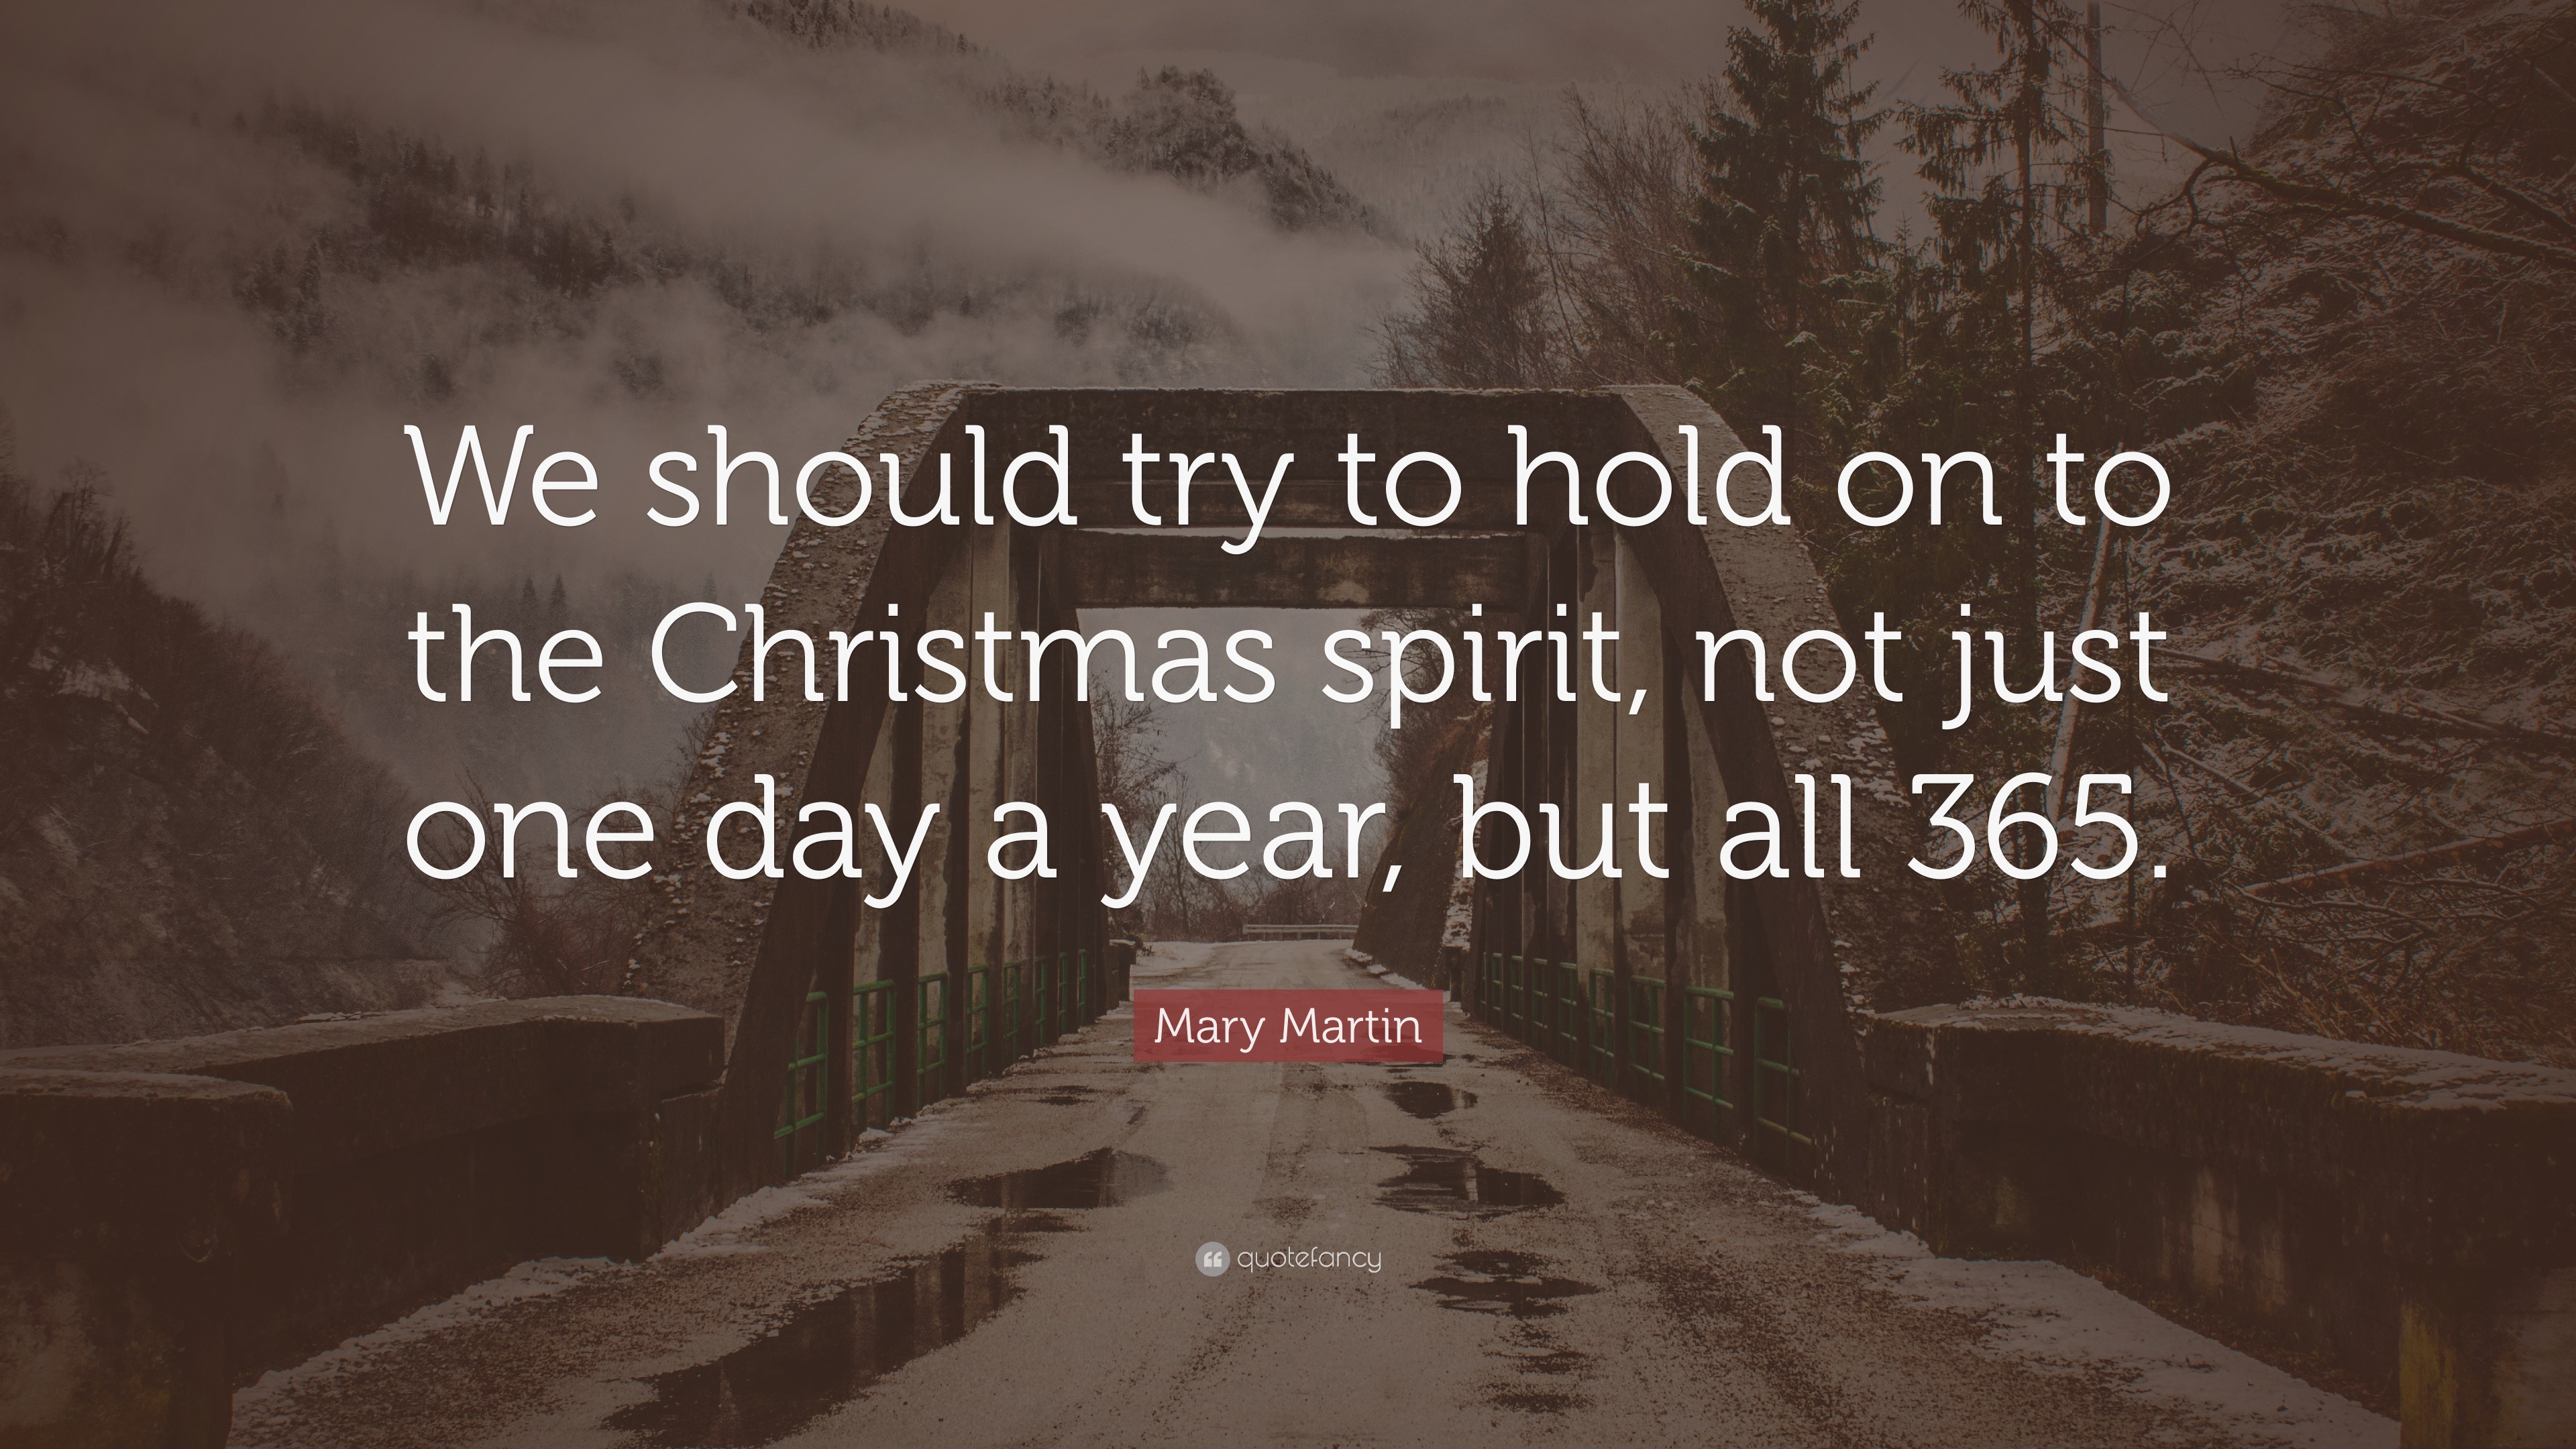 Mary Martin Quote: “We should try to hold on to the Christmas spirit ...